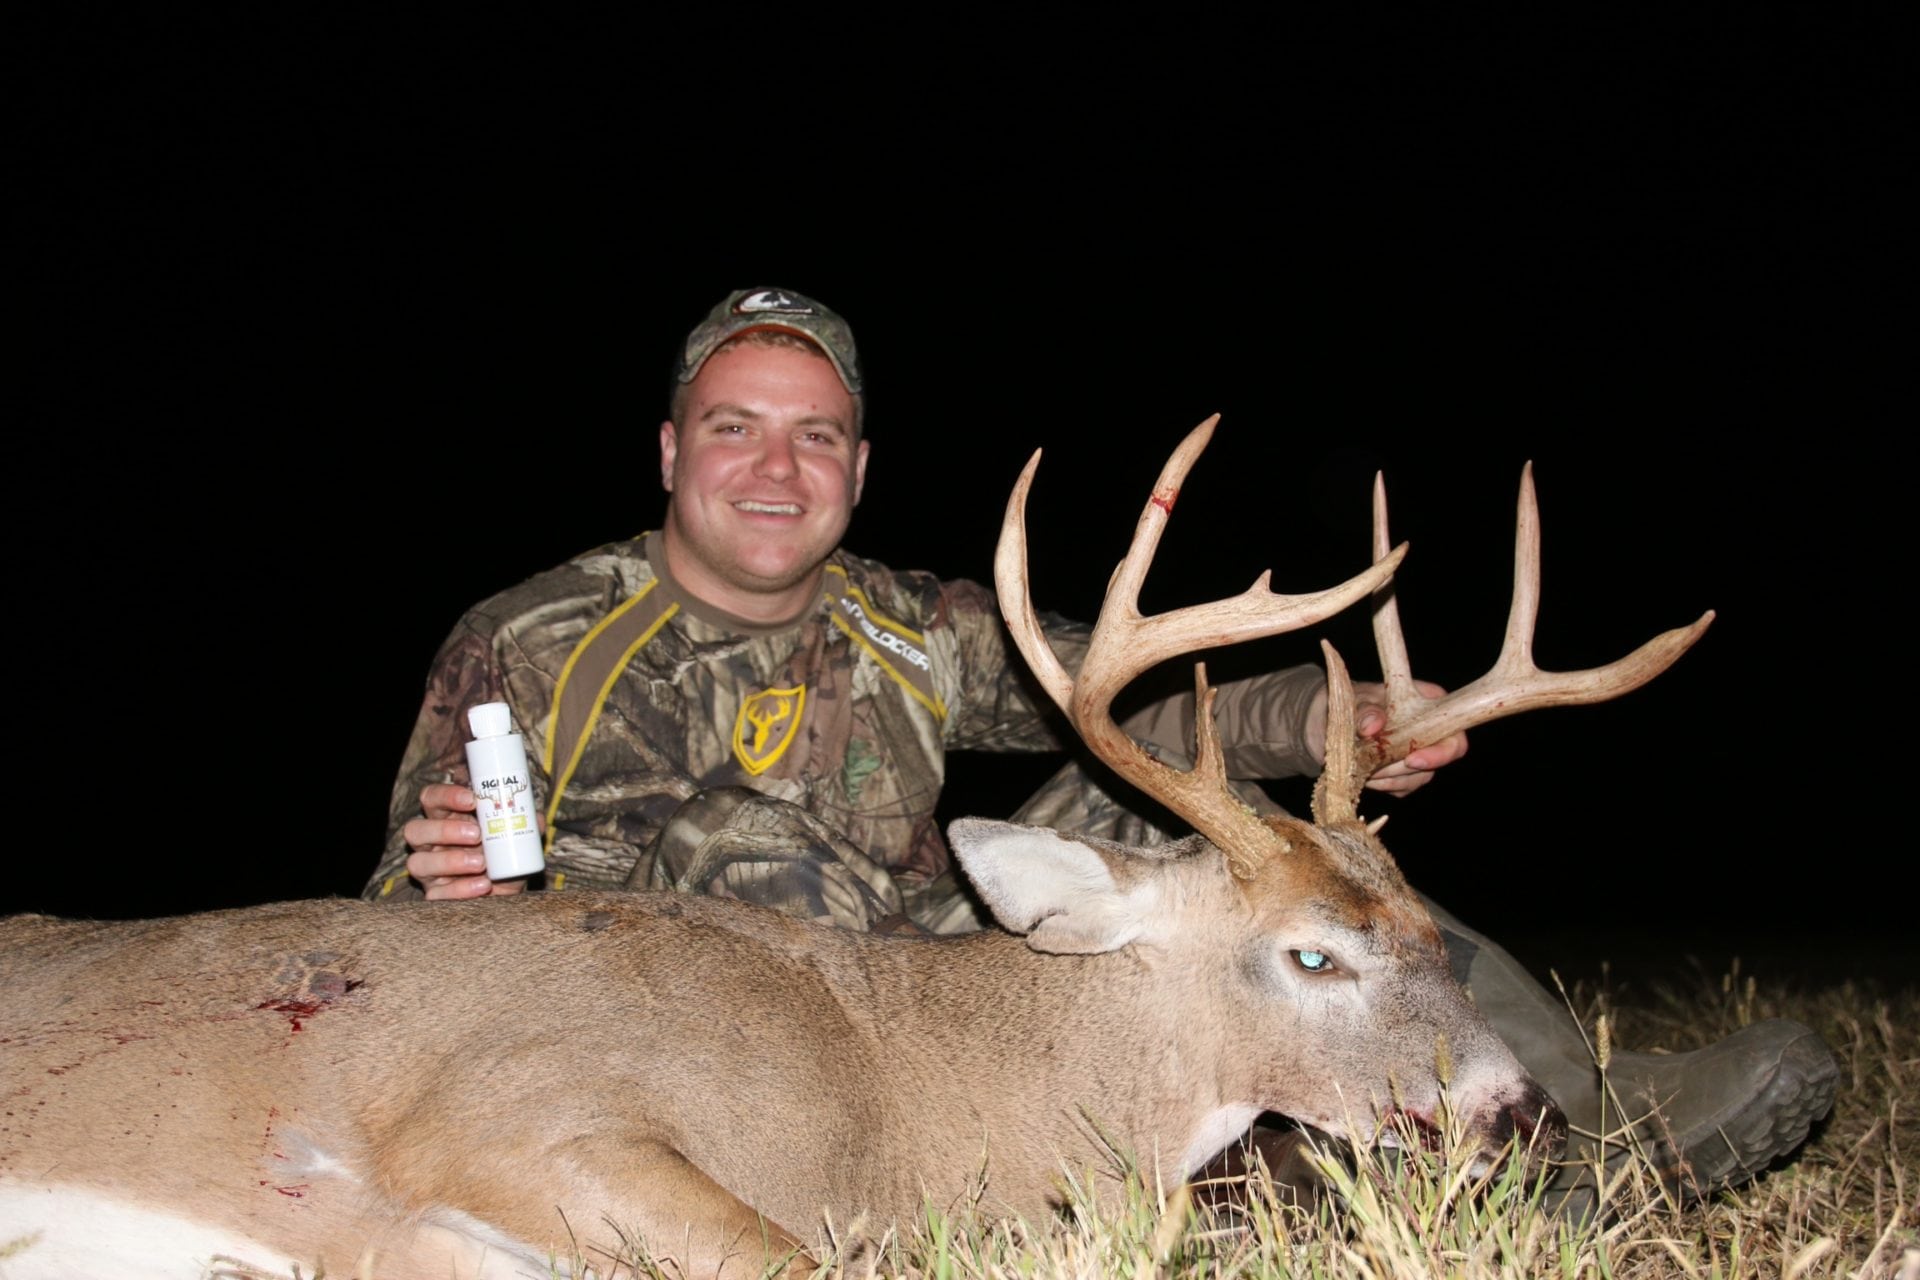 A man holding a bottle of beer next to a deer.